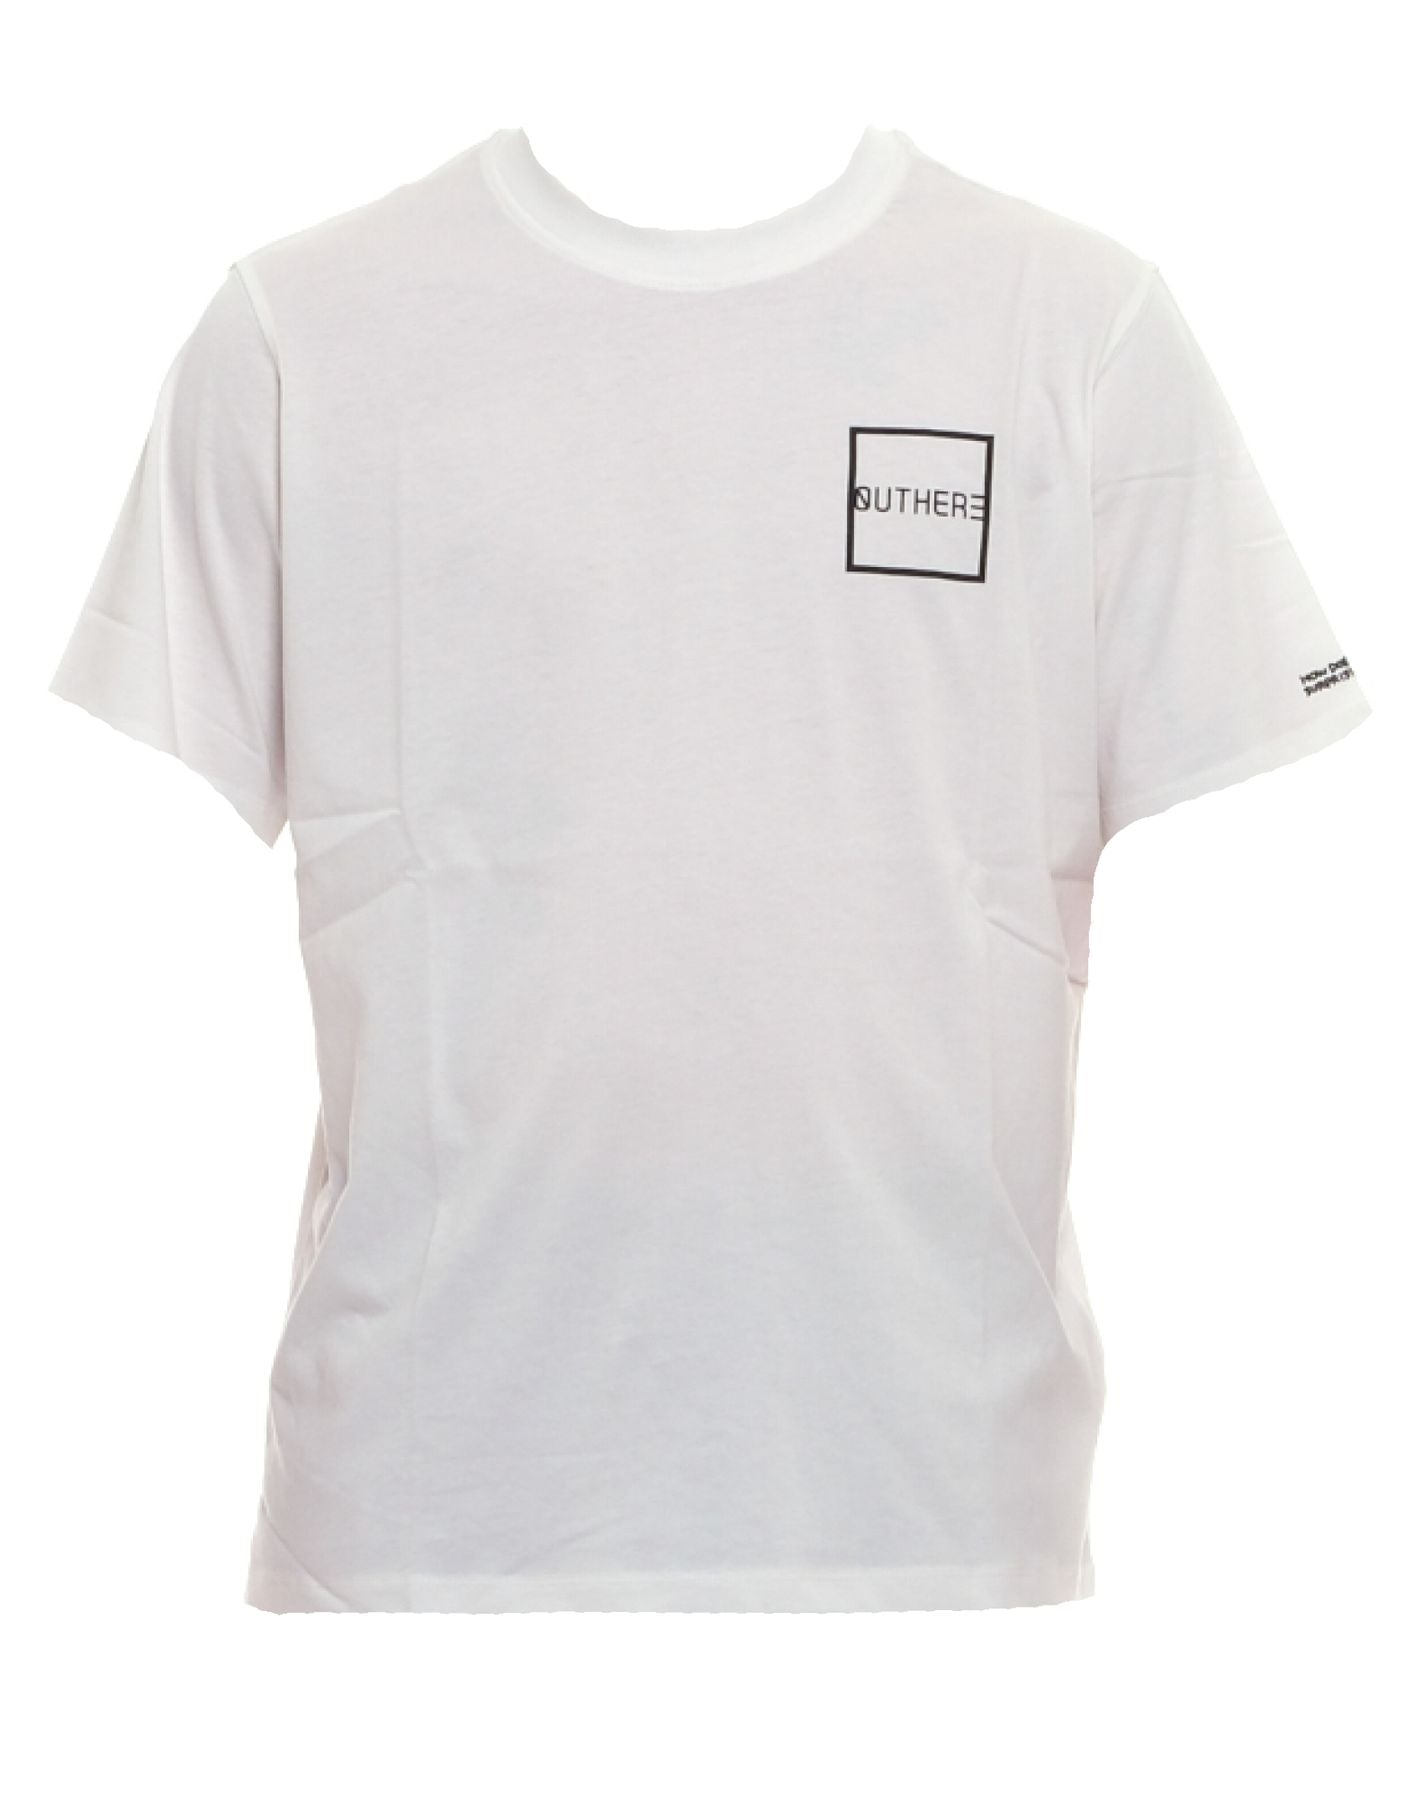 T-Shirt Man EOTM136AG95 White Outheree